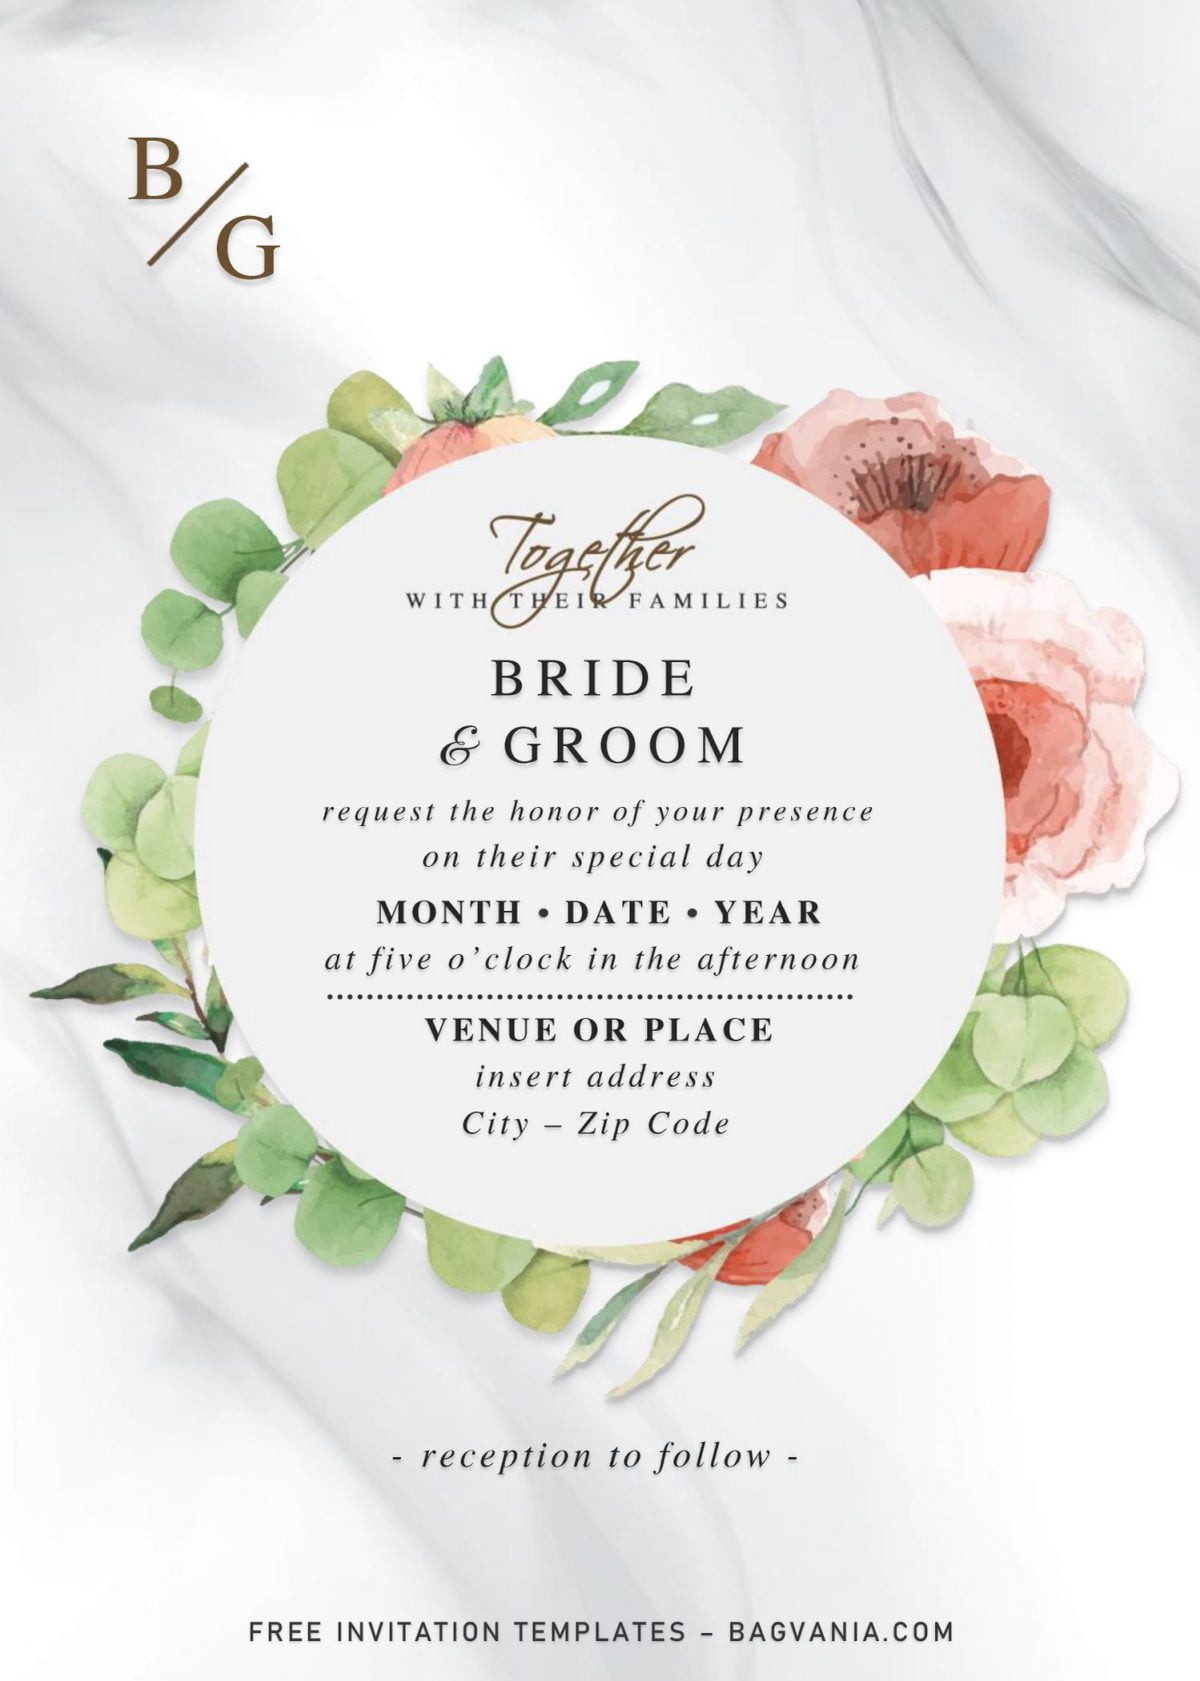 Free Vintage Floral Wedding Invitation Templates For Word and has white and black marble background